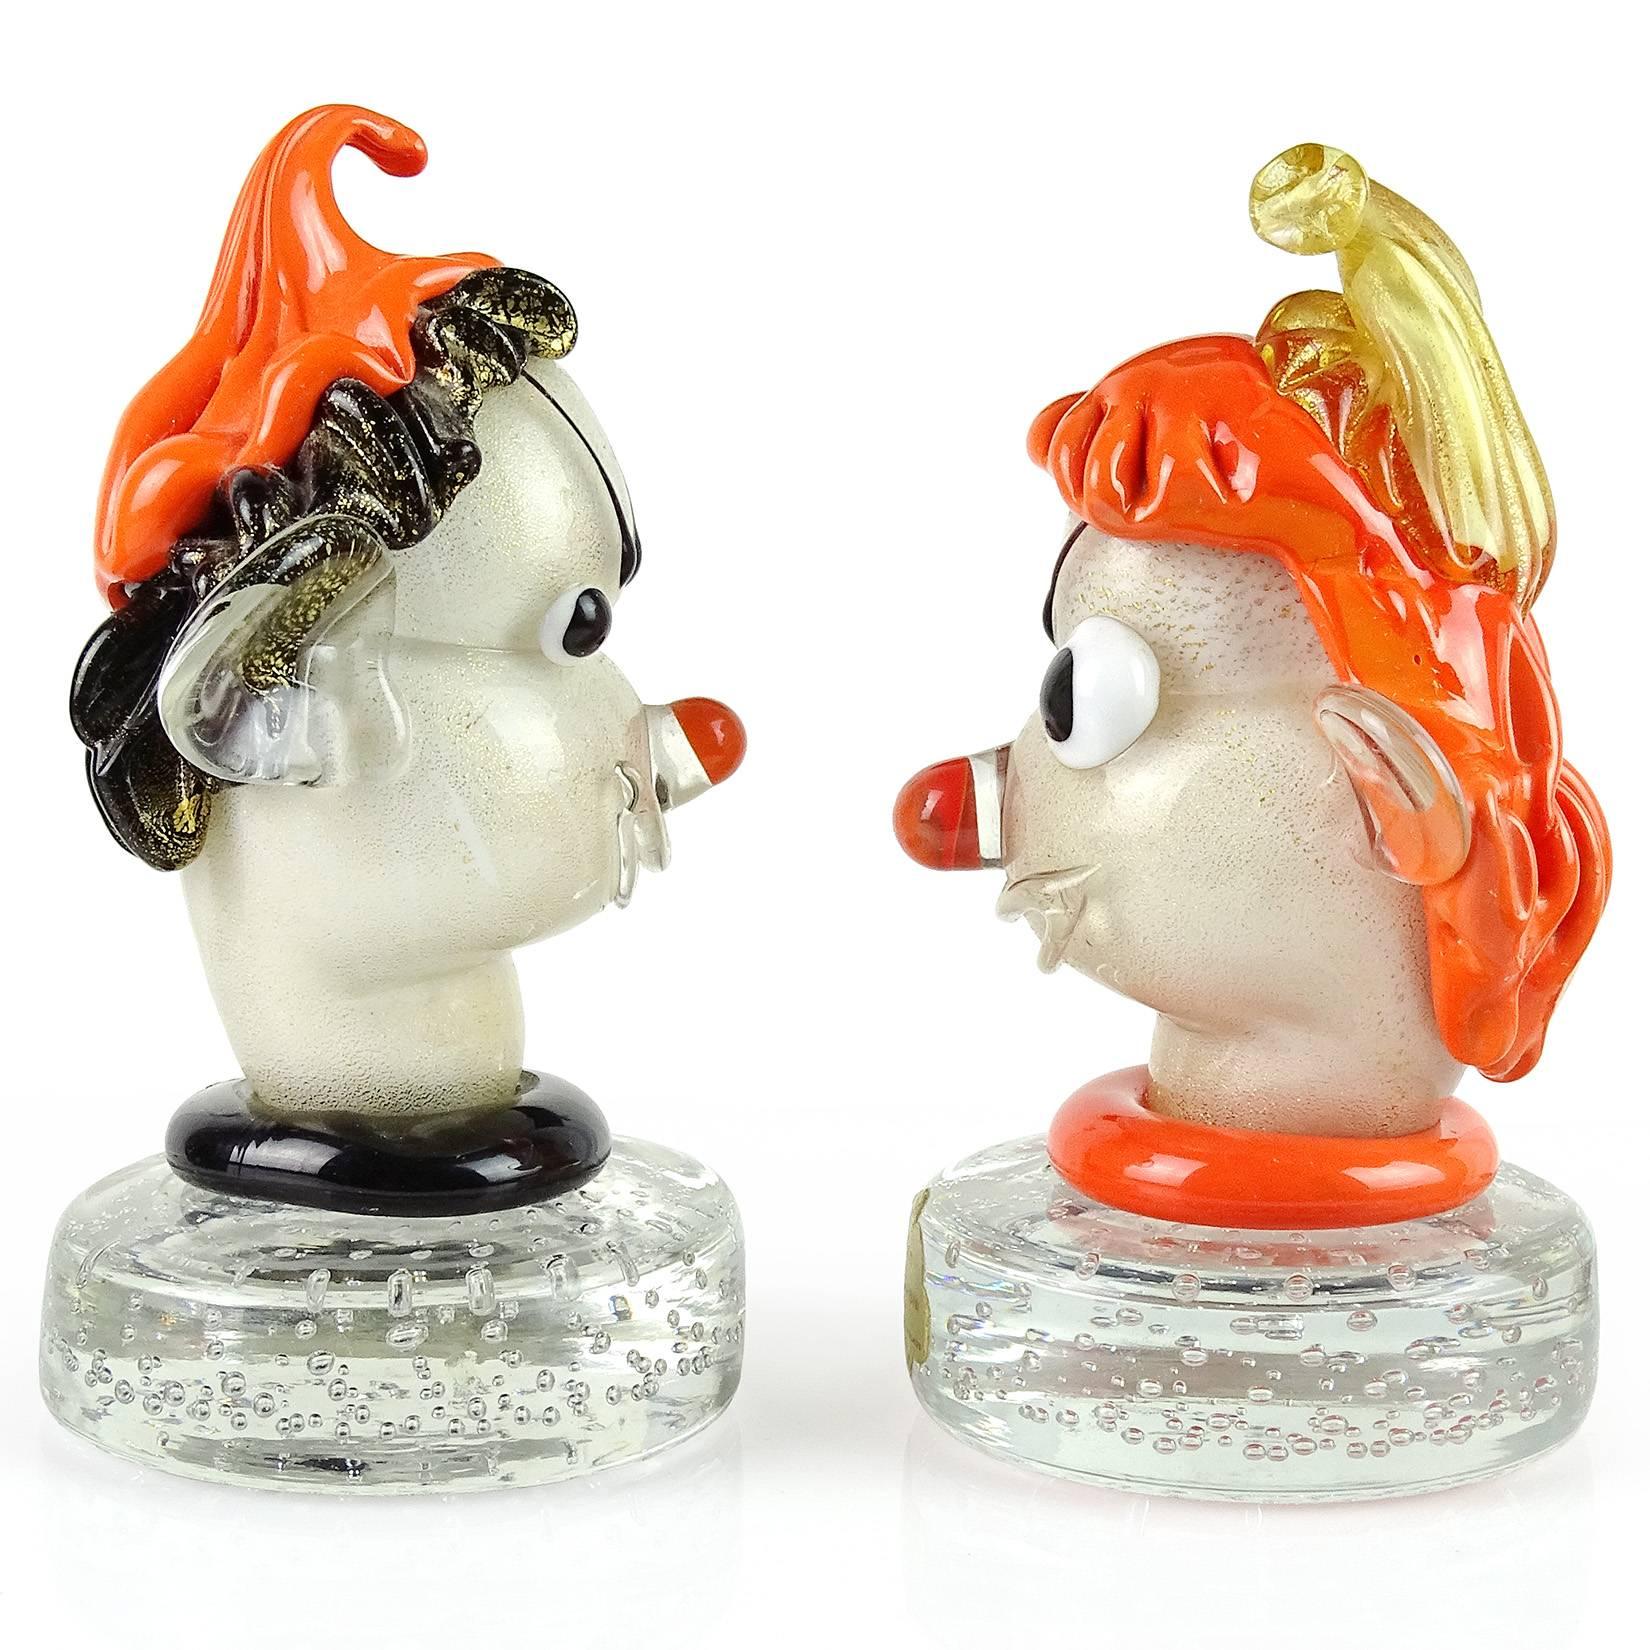 Priced per item, beautiful and cute Murano handblown orange, black, white and gold flecks Italian art glass elf head paperweights. Documented to designer Alfredo Barbini. One with original Barbini label. Very expressive little guys, with hats and